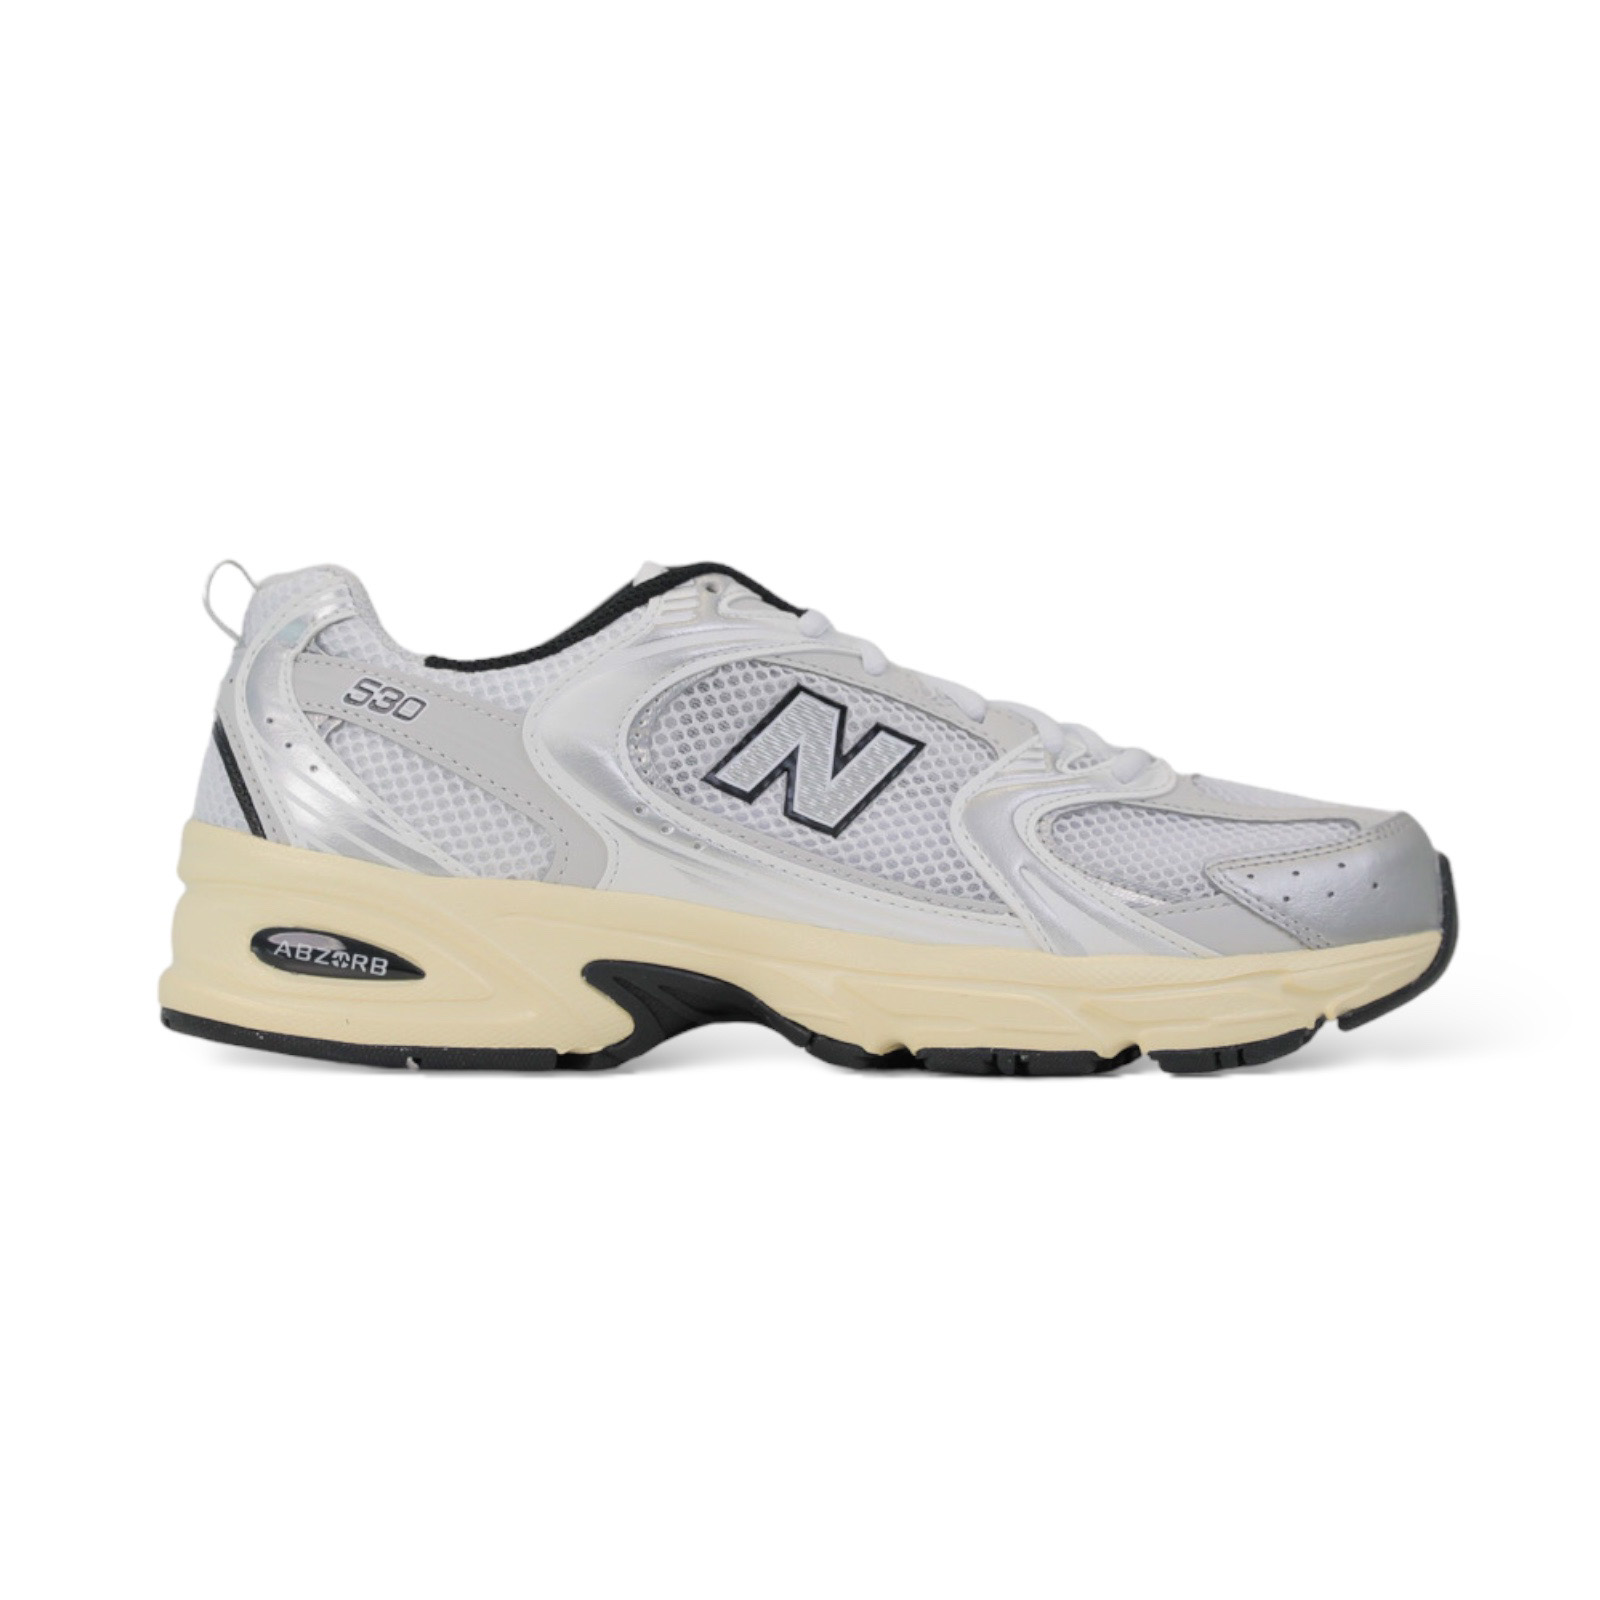 New Balance 530 - Silver and black